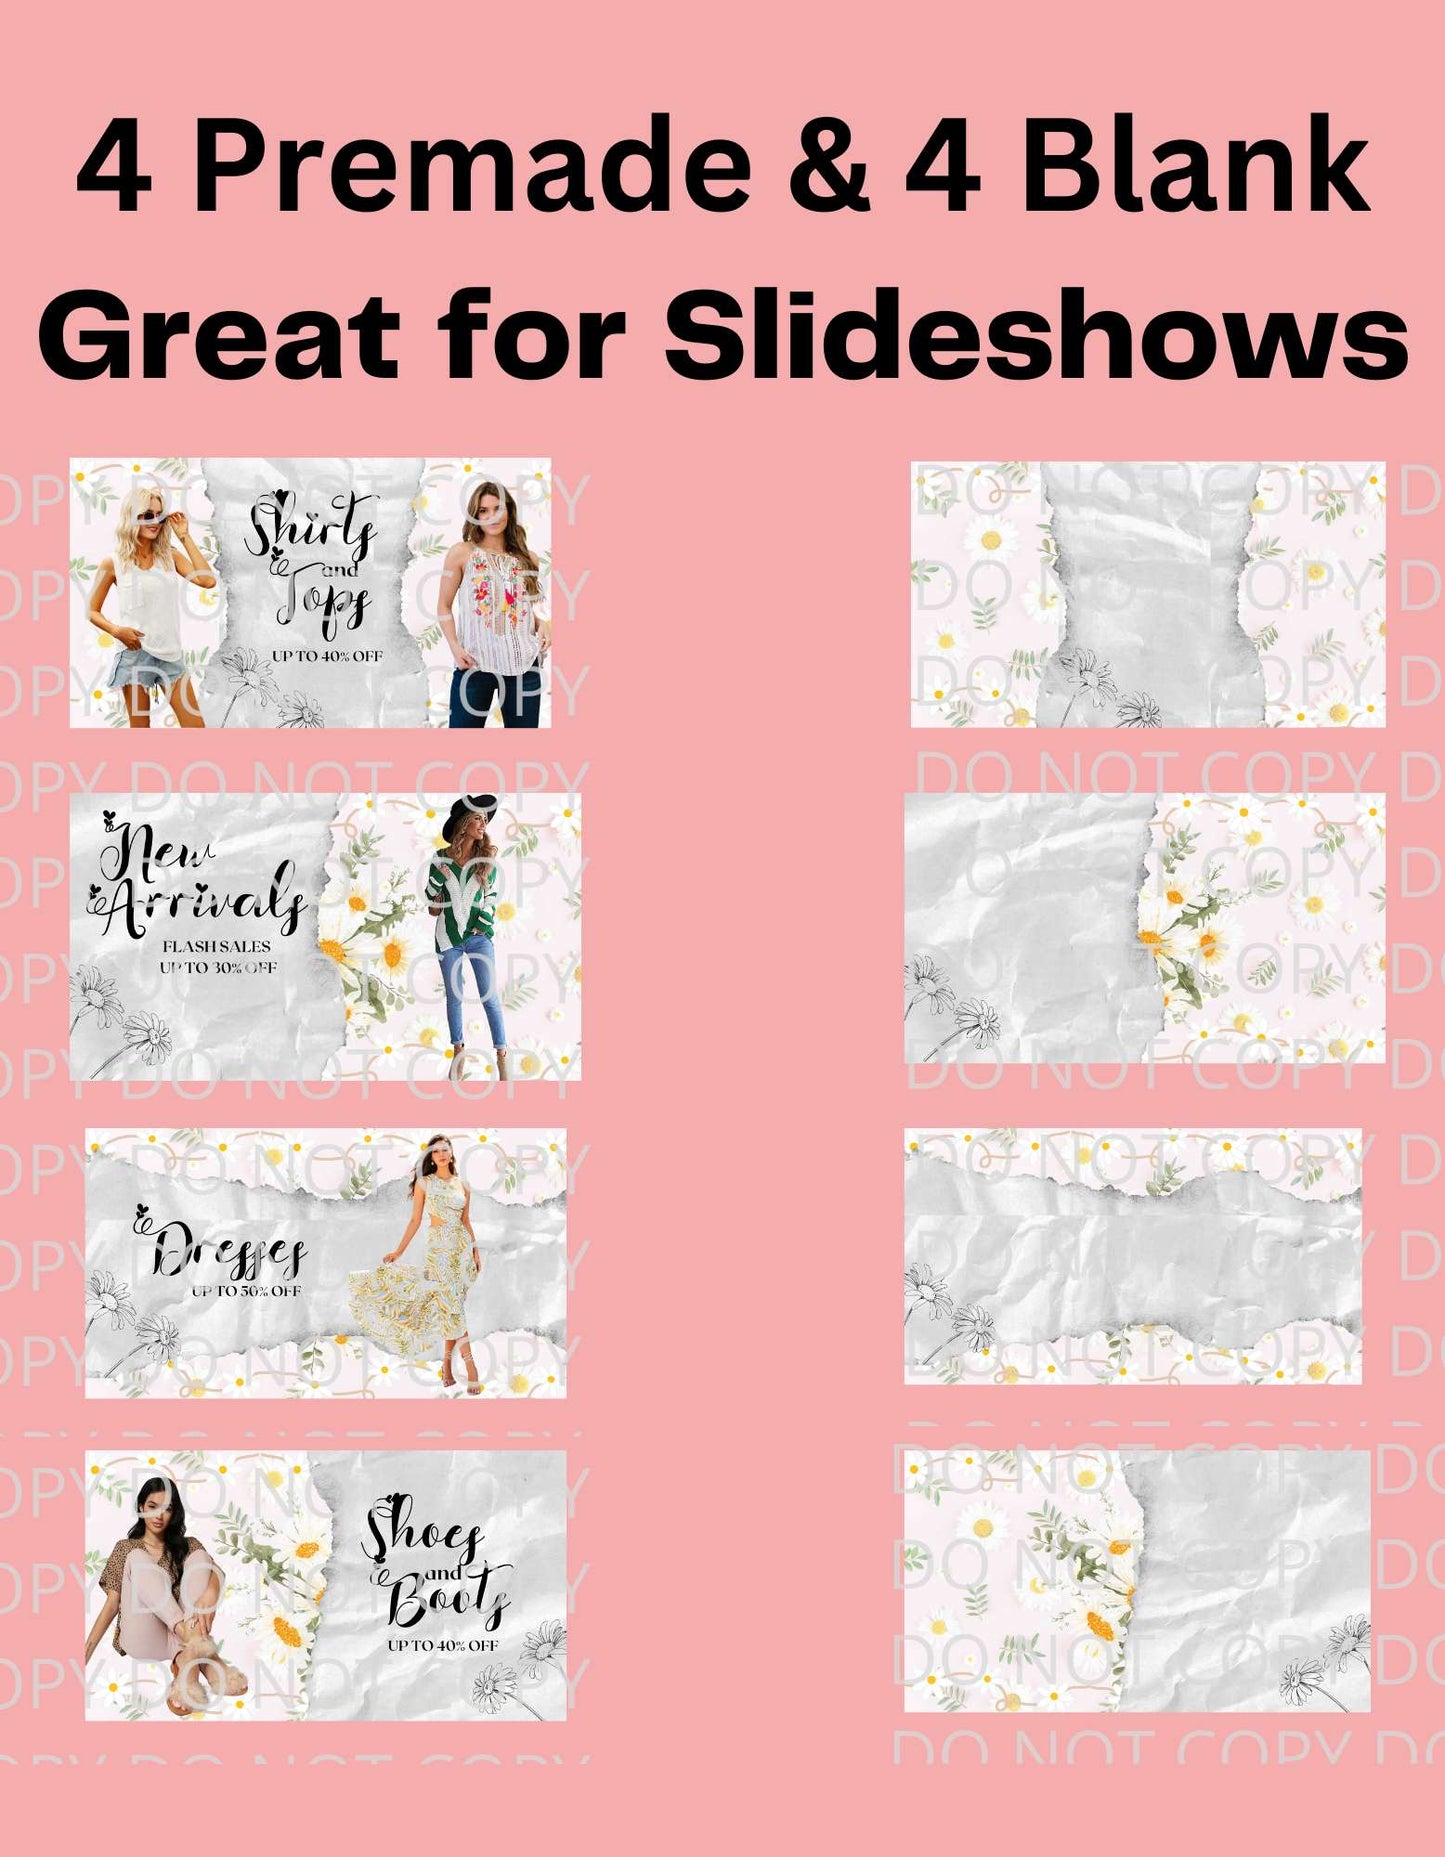 BGShop 37 Digital Daisy Themed Banners & Pics for Blog Posts or Sites | 31 Banners & 6 Pics | JPG PNG MP4